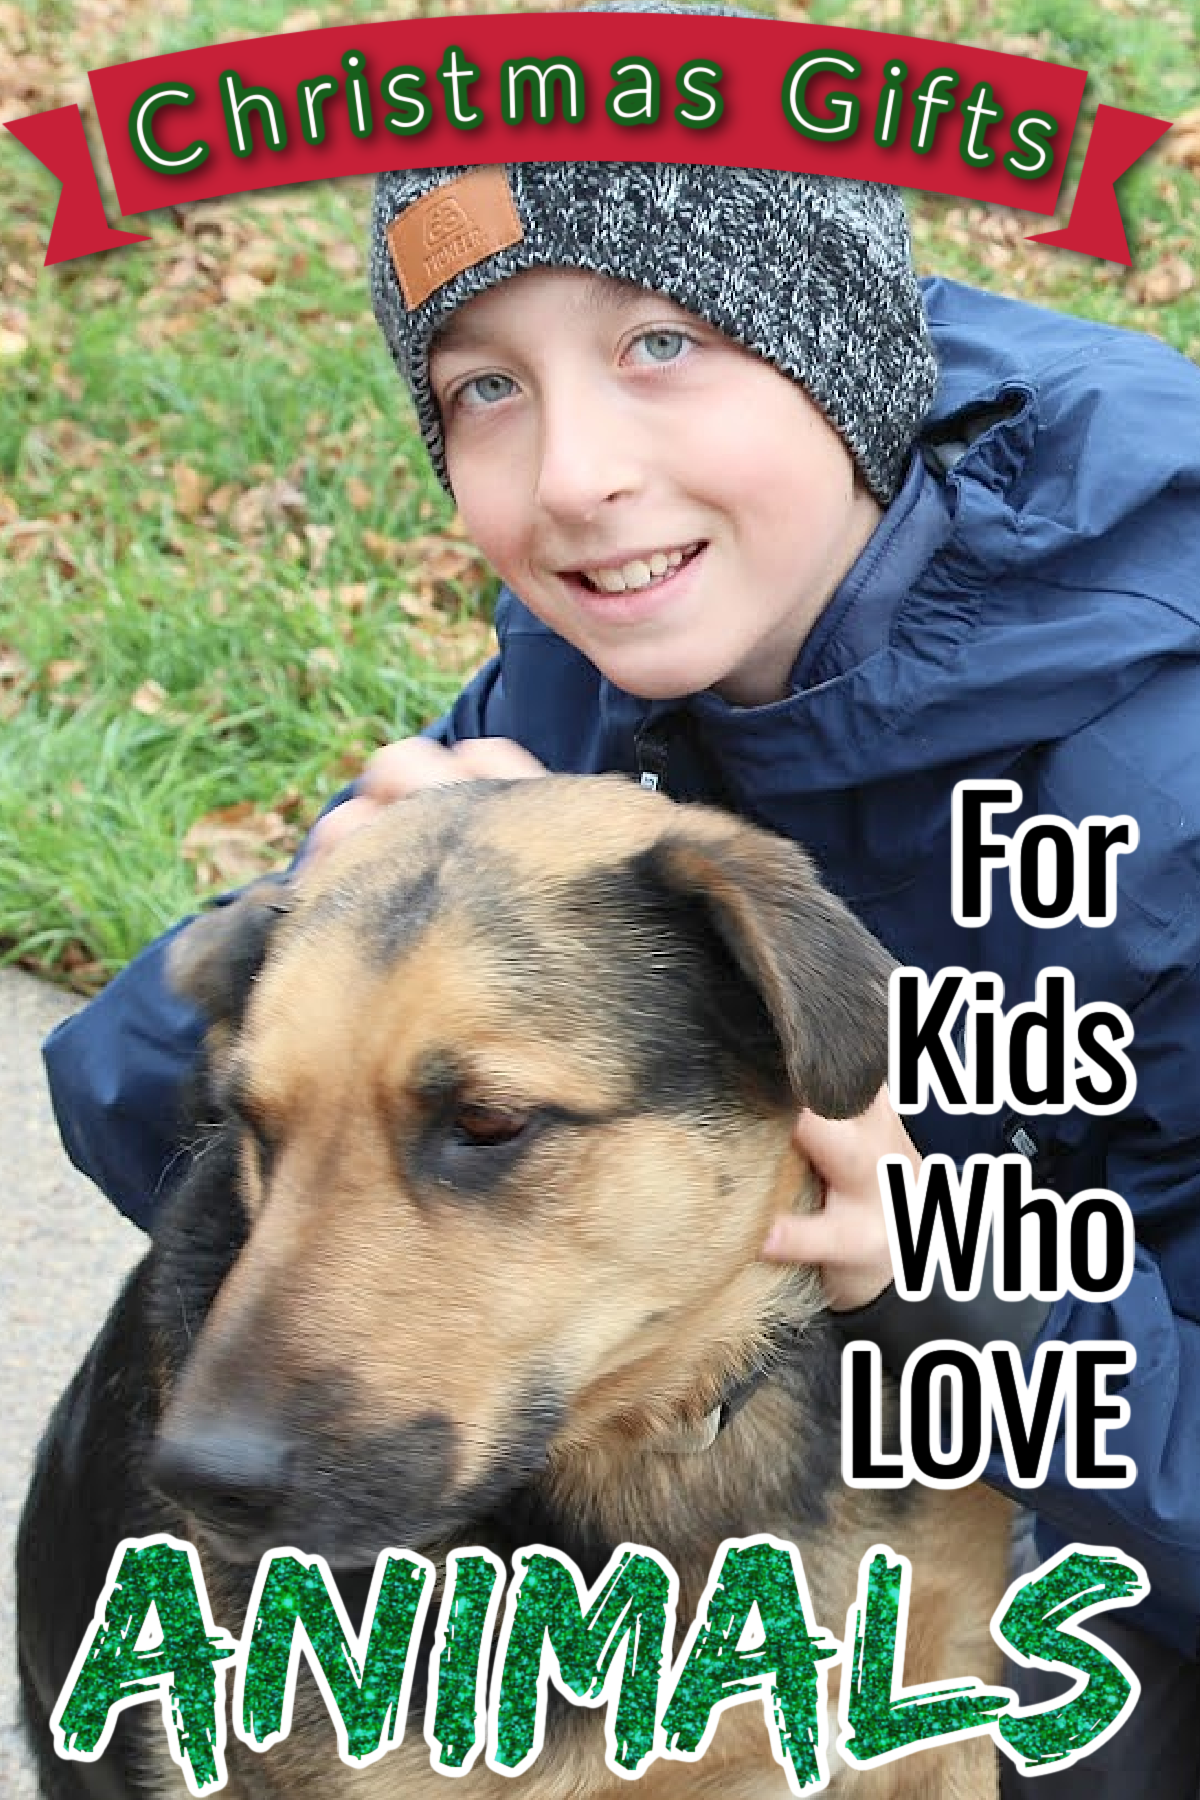 Boy with a dog and a text overlay that says "Christmas Gifts for kids who love animals"